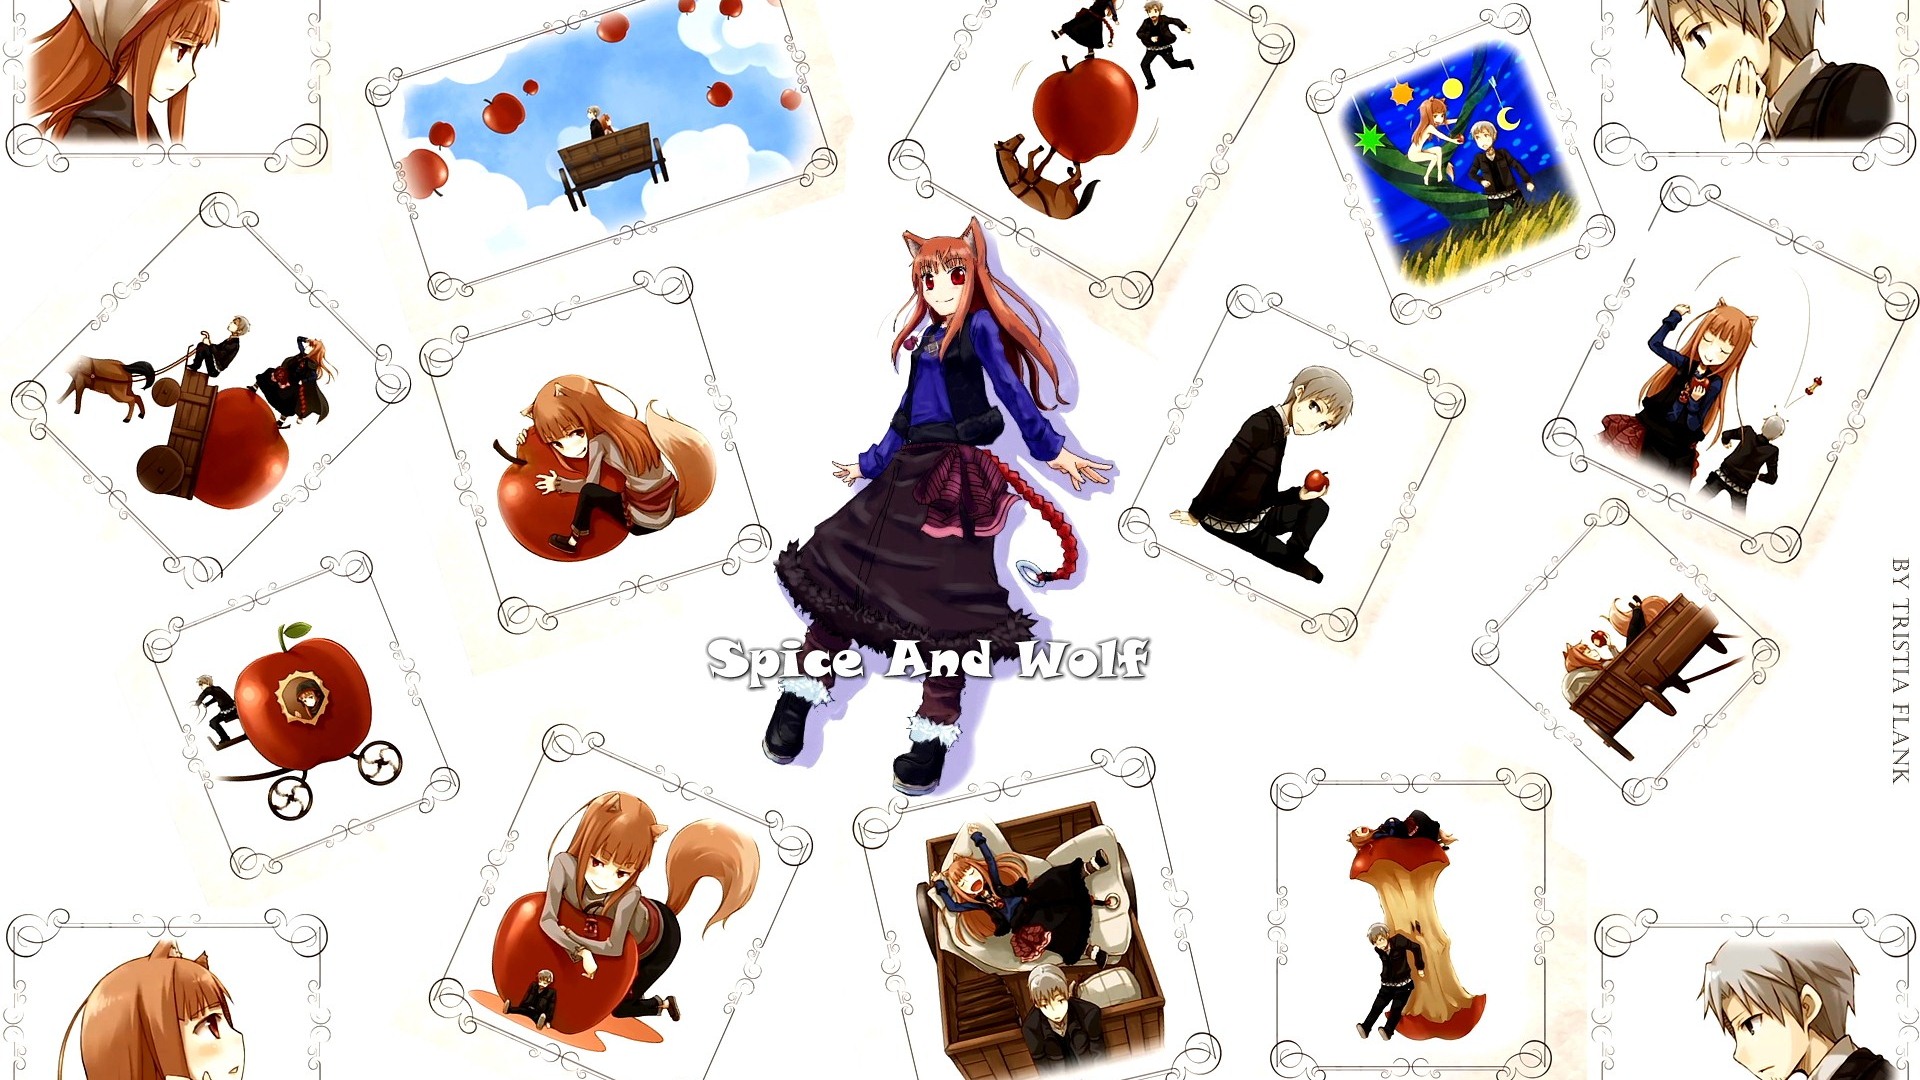 Spice and Wolf HD wallpapers #13 - 1920x1080